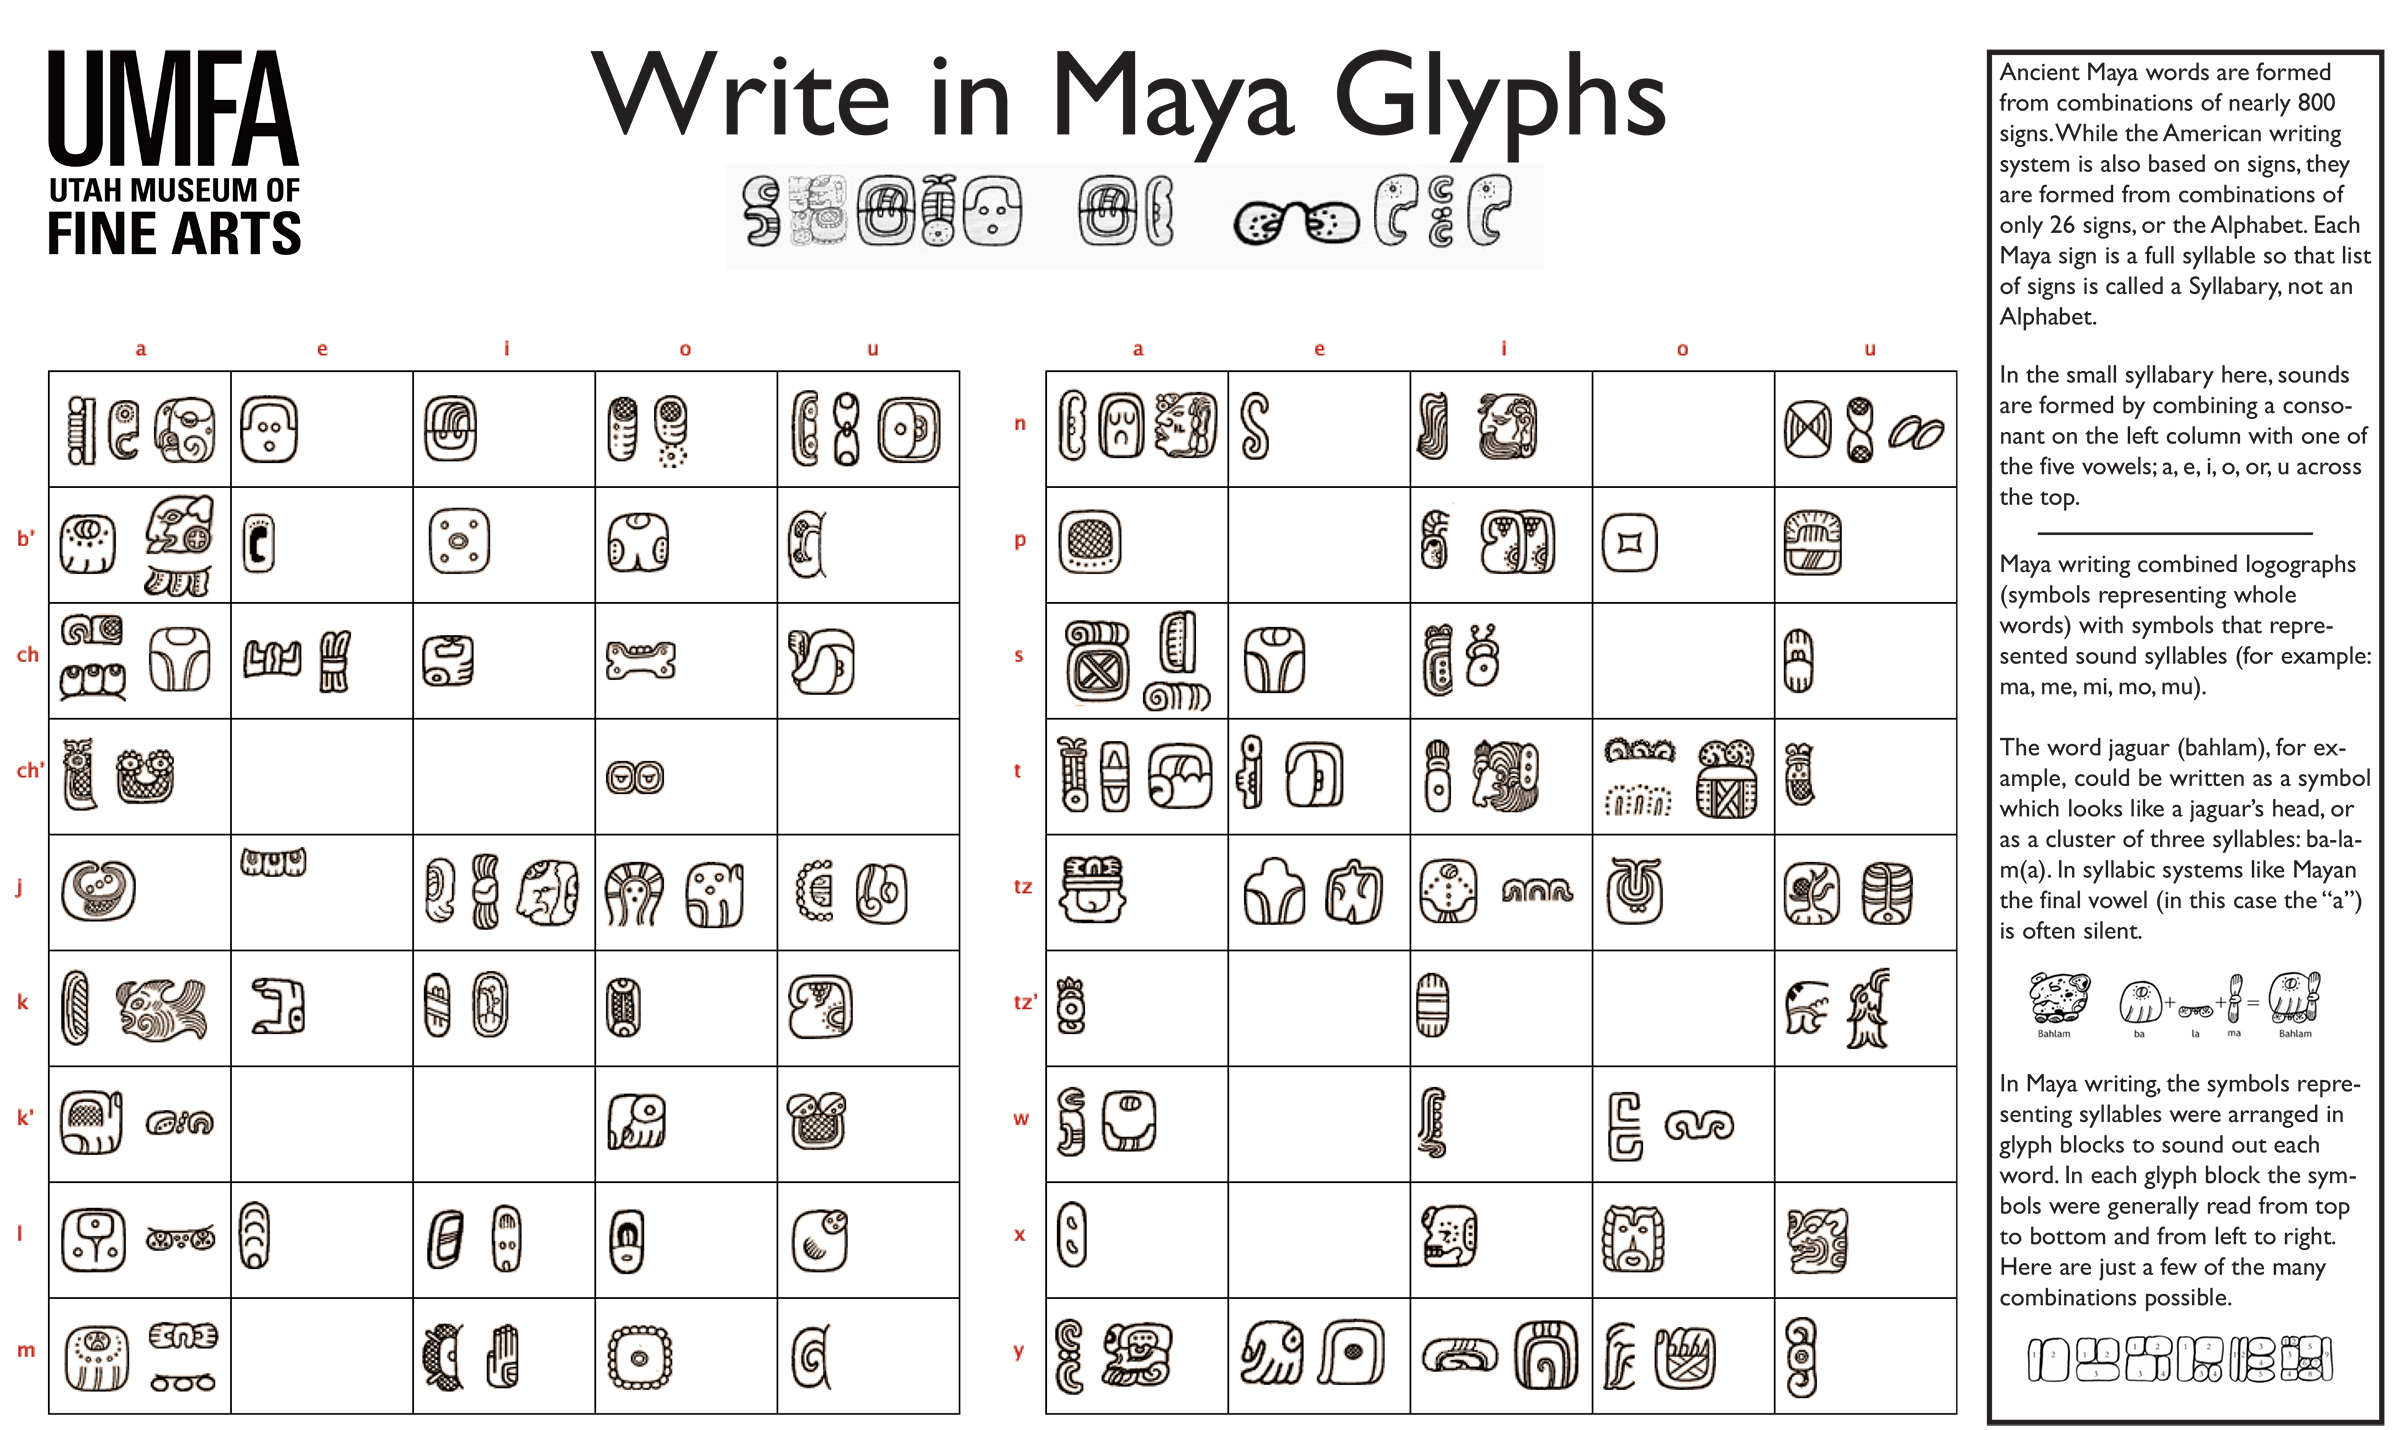 How to write in Mayan glyphs